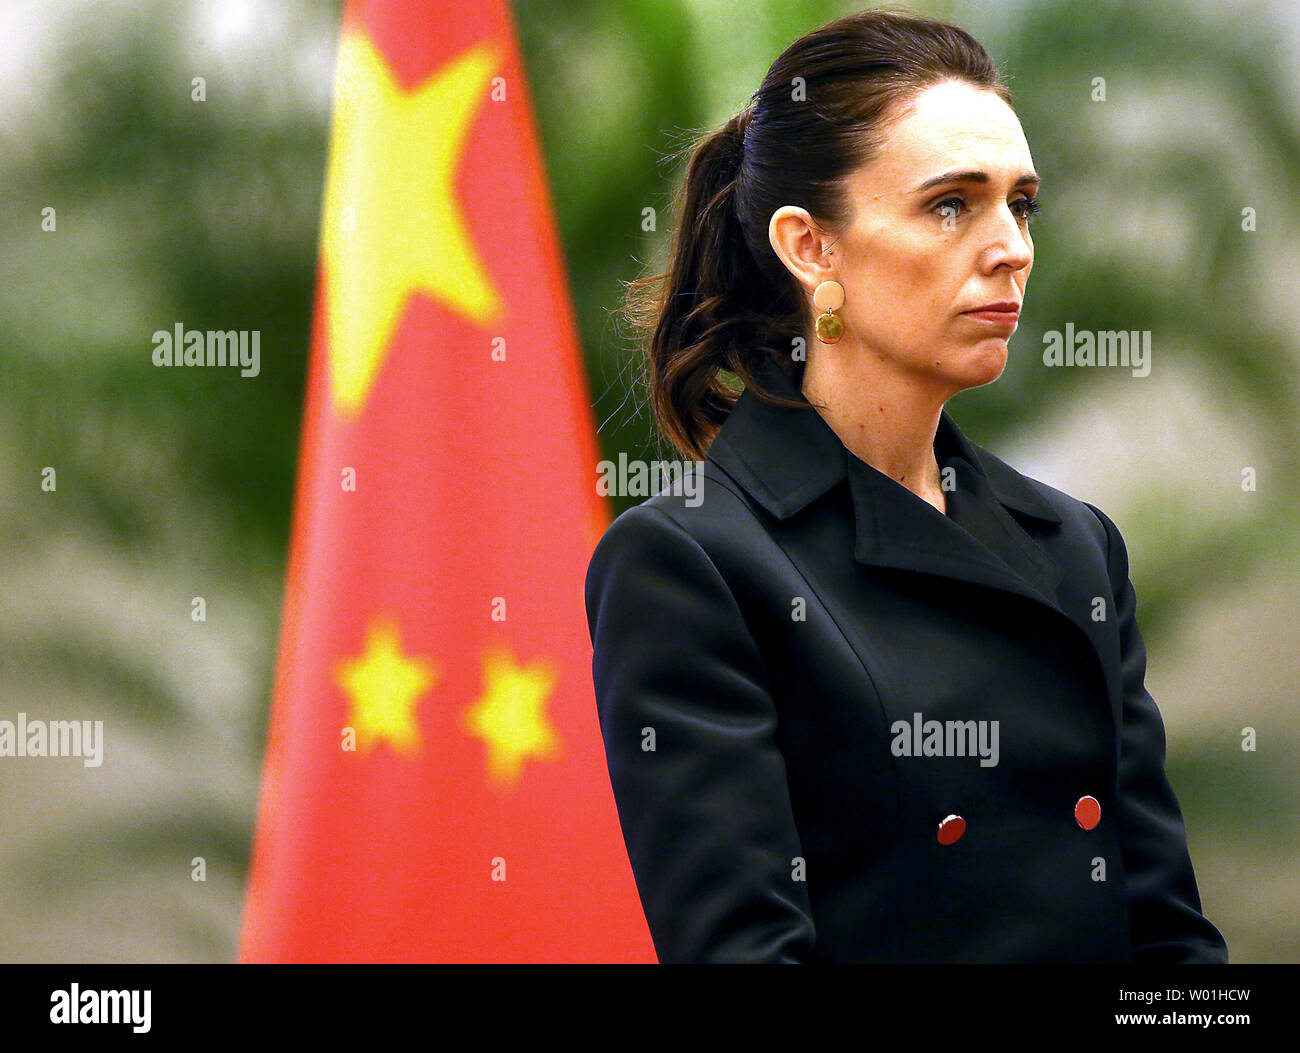 New Zealand (NZ) Prime Minister Jacinda Ardern listens to her national anthem during a welcoming ceremony at the Great Hall of the People in Beijing on April 1, 2019.  China and NZ signed agreements on eliminating double taxation and tax avoidance as the two countries look to reset economic relations.   Photo by Stephen Shaver/UPI Stock Photo